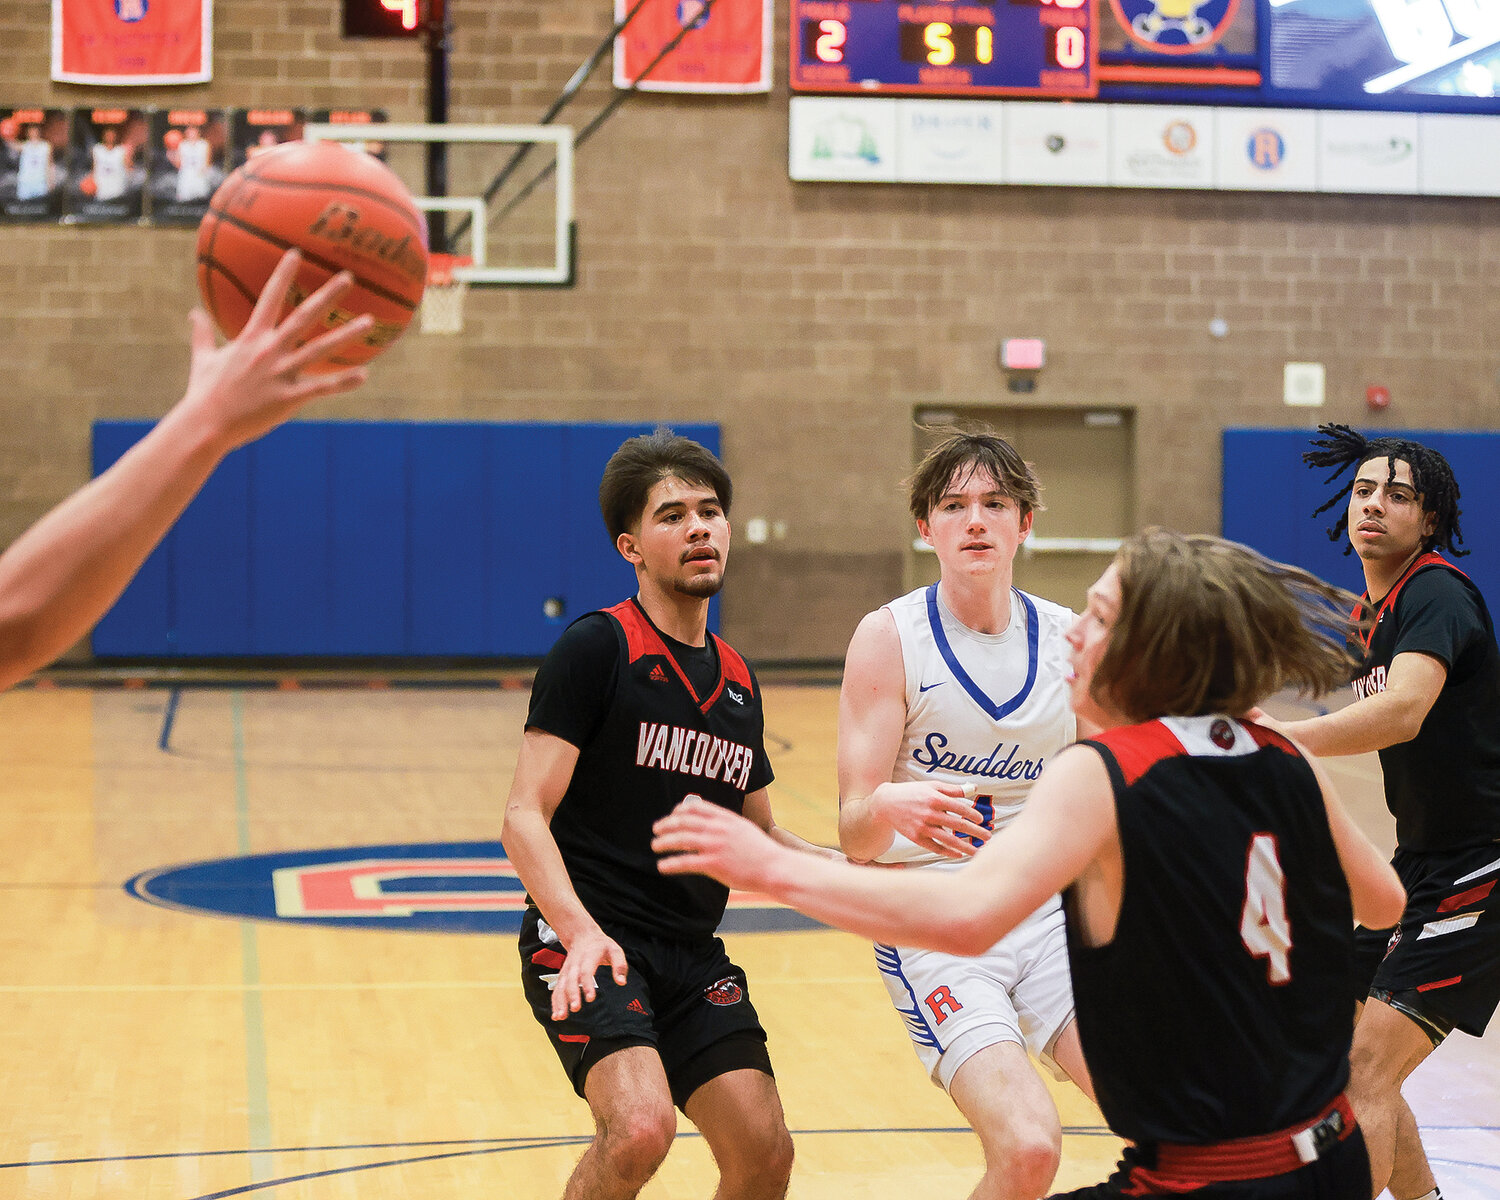 Ridgefield guard Cole Chester passes the ball in the lane during the Spudders’ 56-39 win over the Fort Vancouver Trappers on Wednesday, Jan. 9.